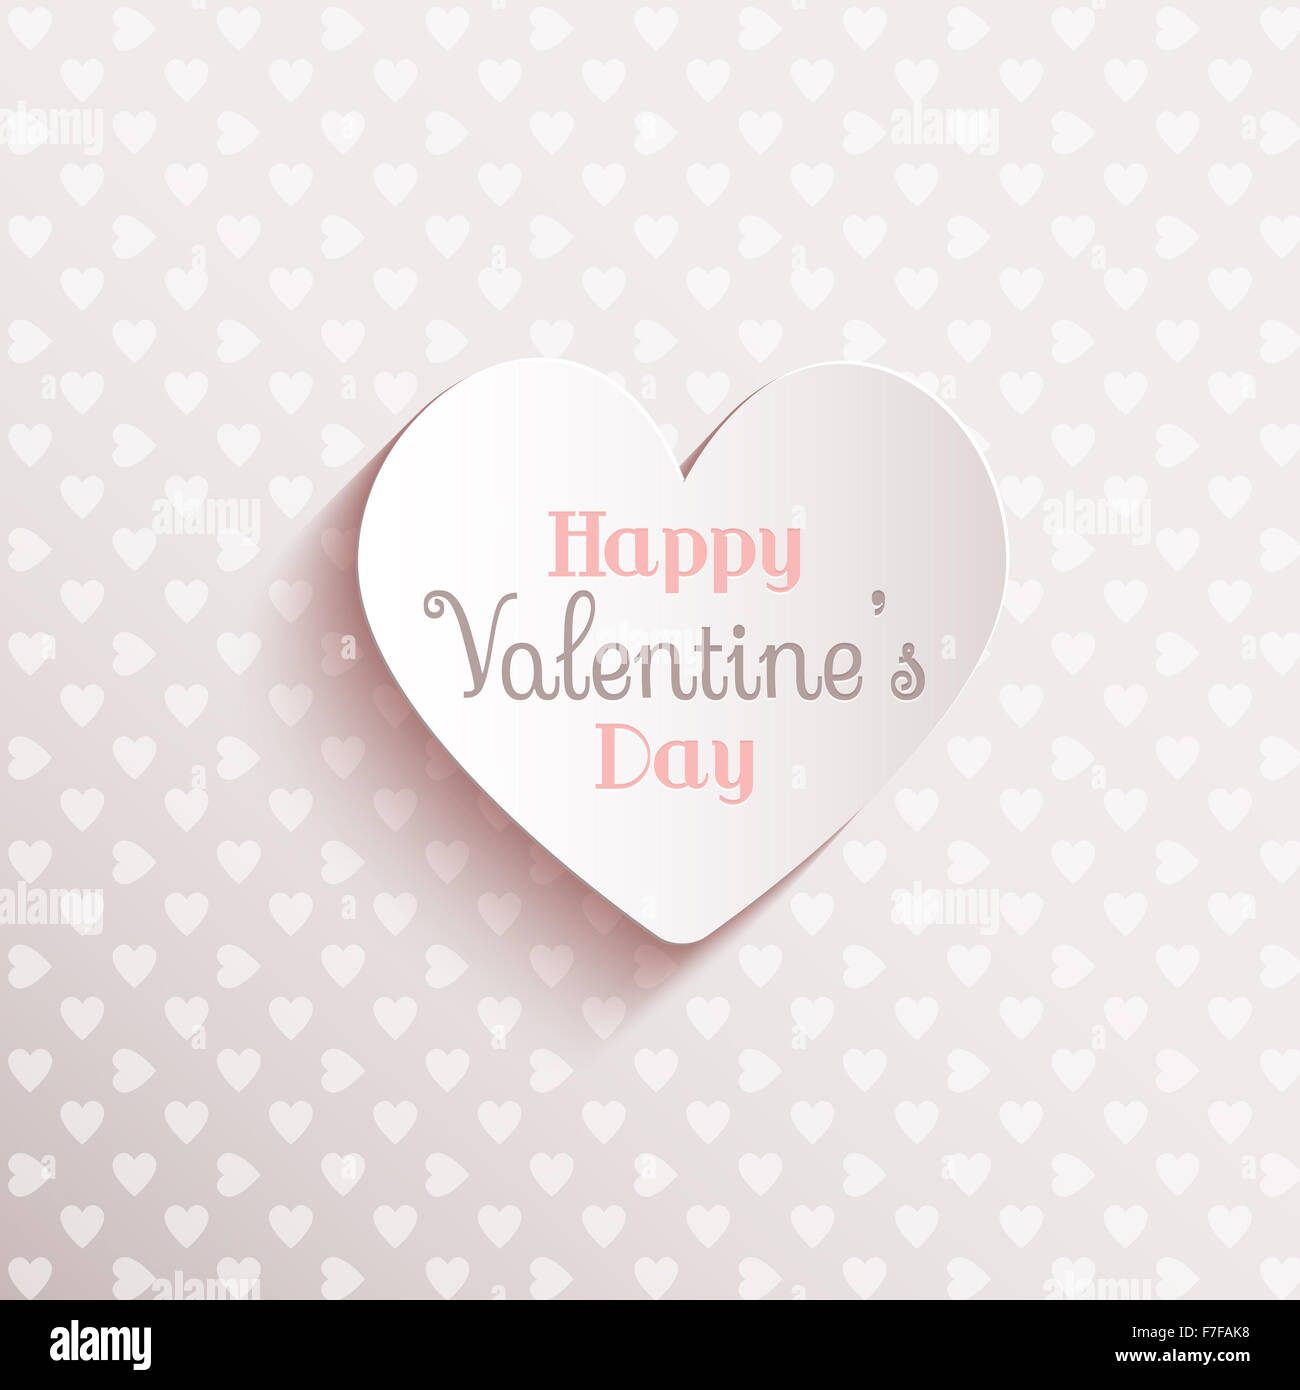 Valentines day background with heart design Stock Photo